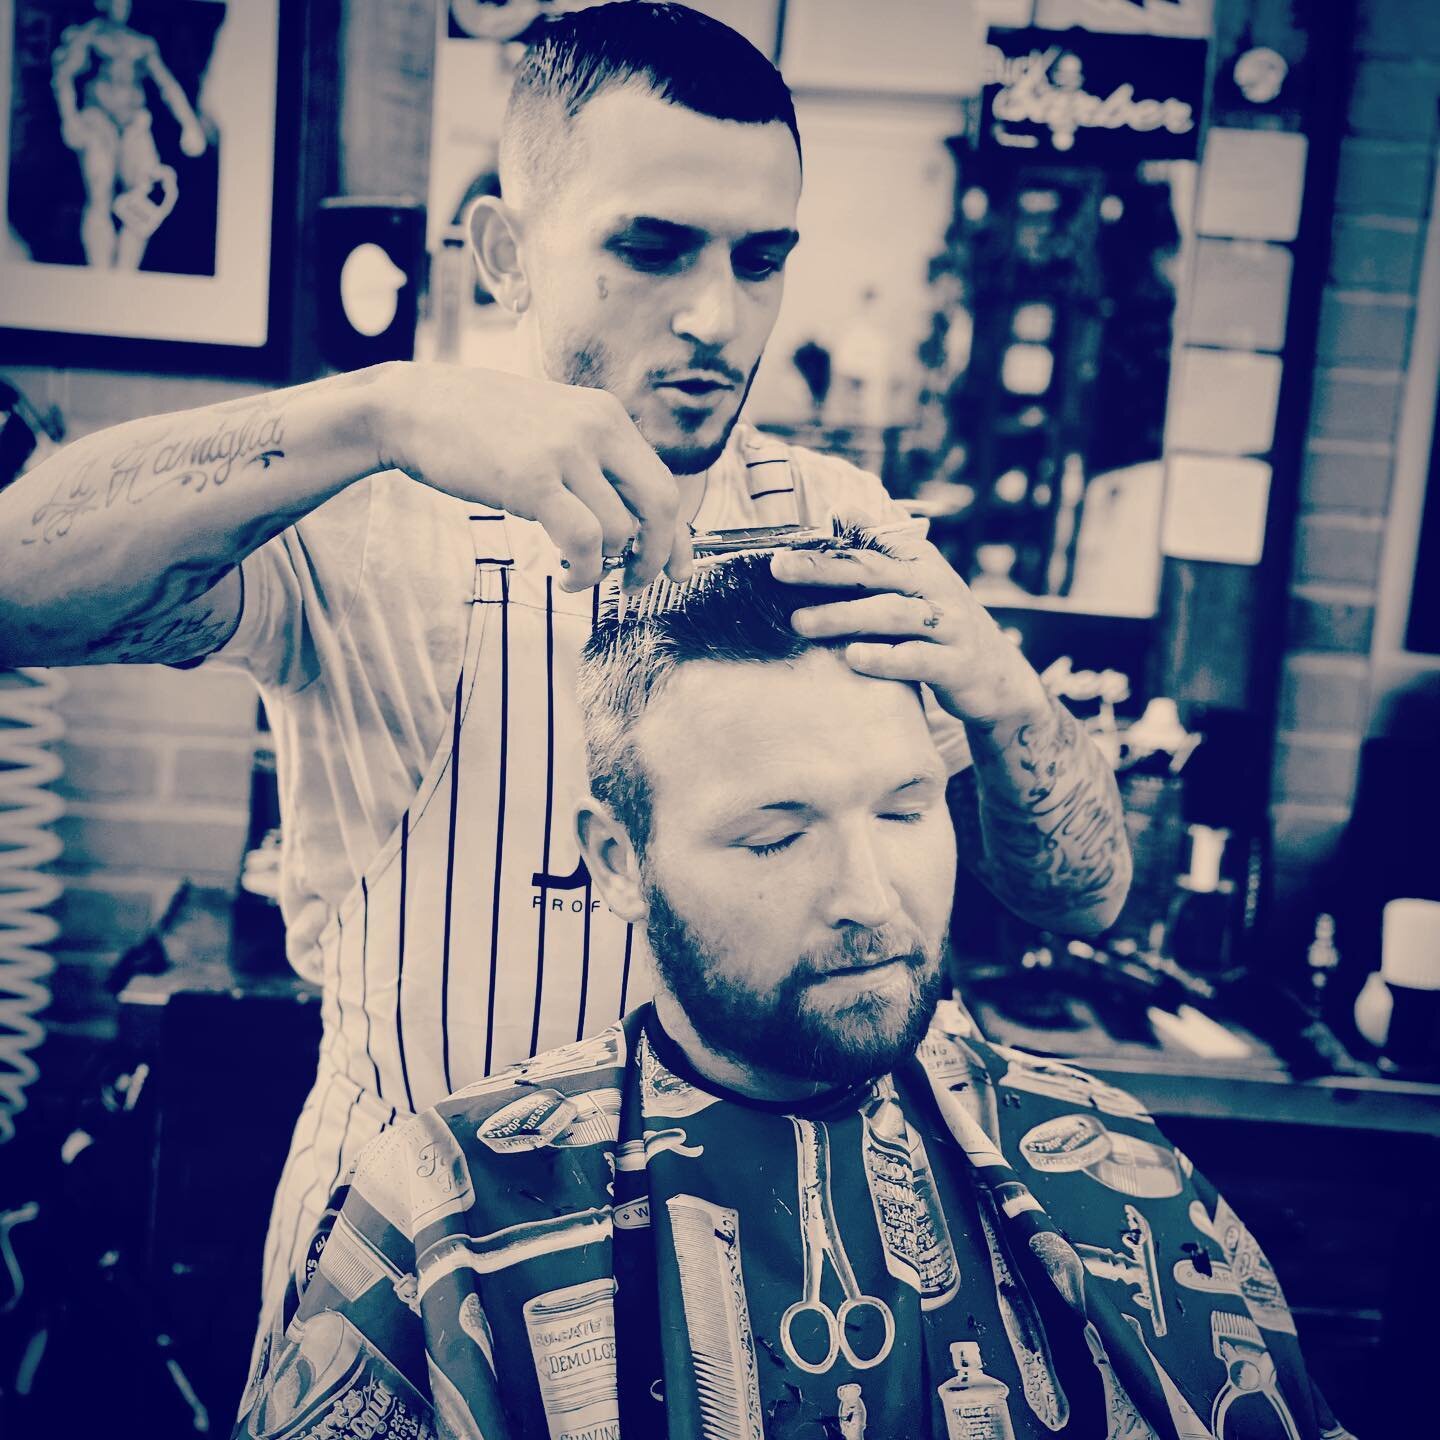 Barber/client relations are of upmost importance. High retention rate=busy barber💈💈